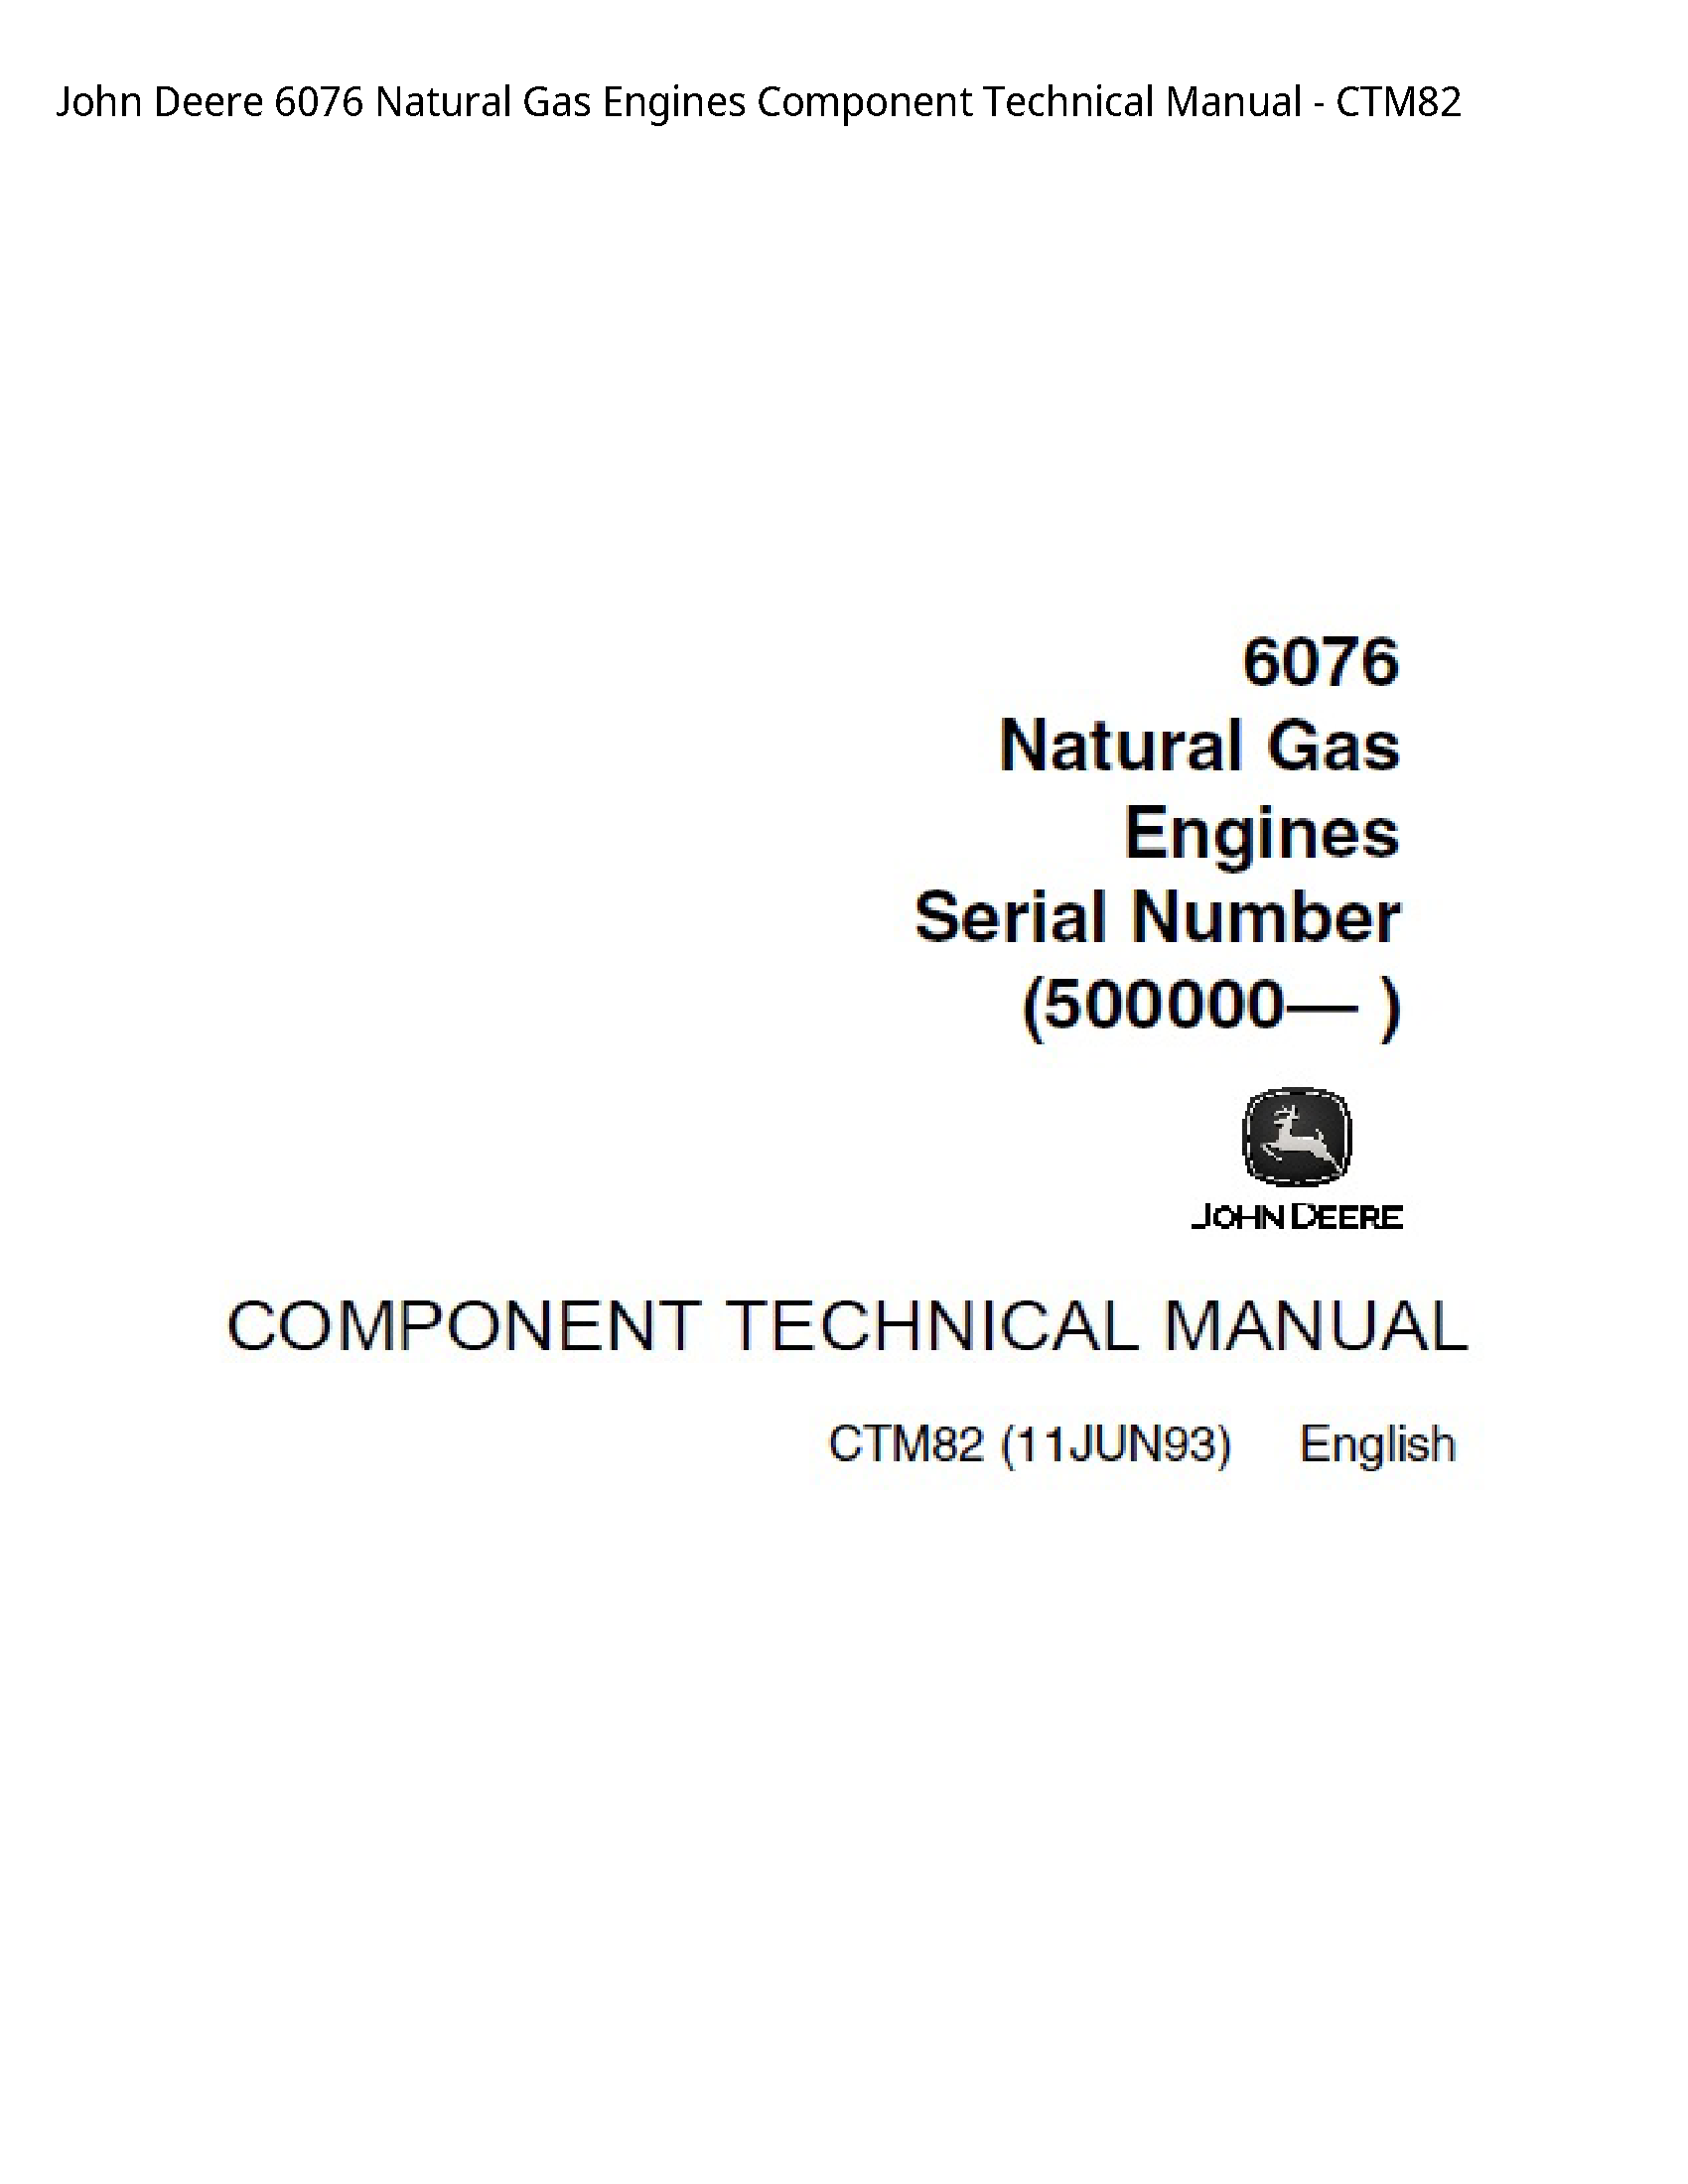 John Deere 6076 Natural Gas Engines Component Technical manual